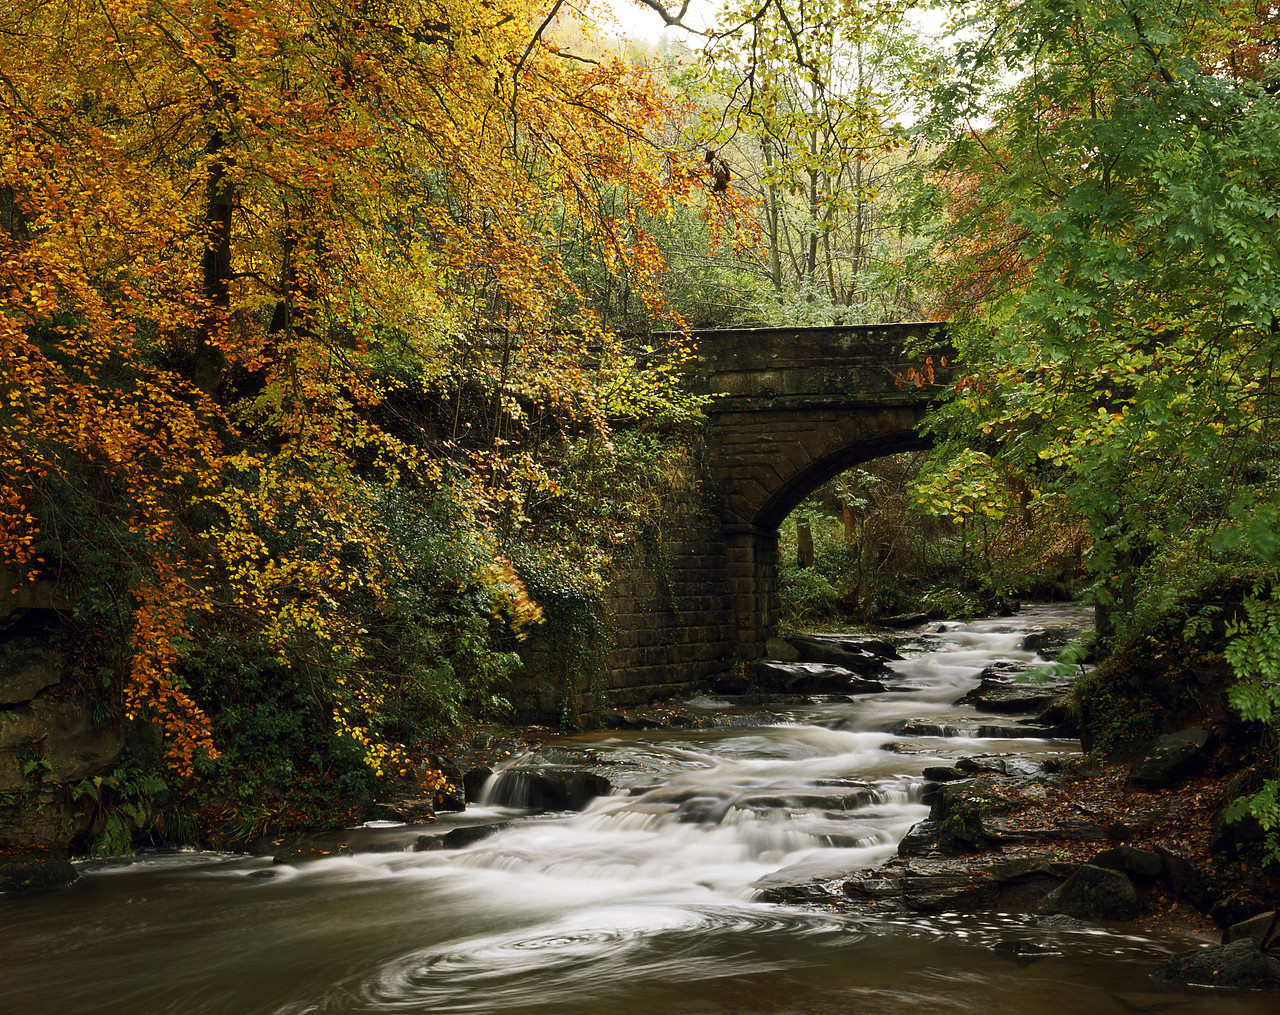 #924116 - Bridge over May Beck in Autumn, near Sneaton, North Yorkshire, England